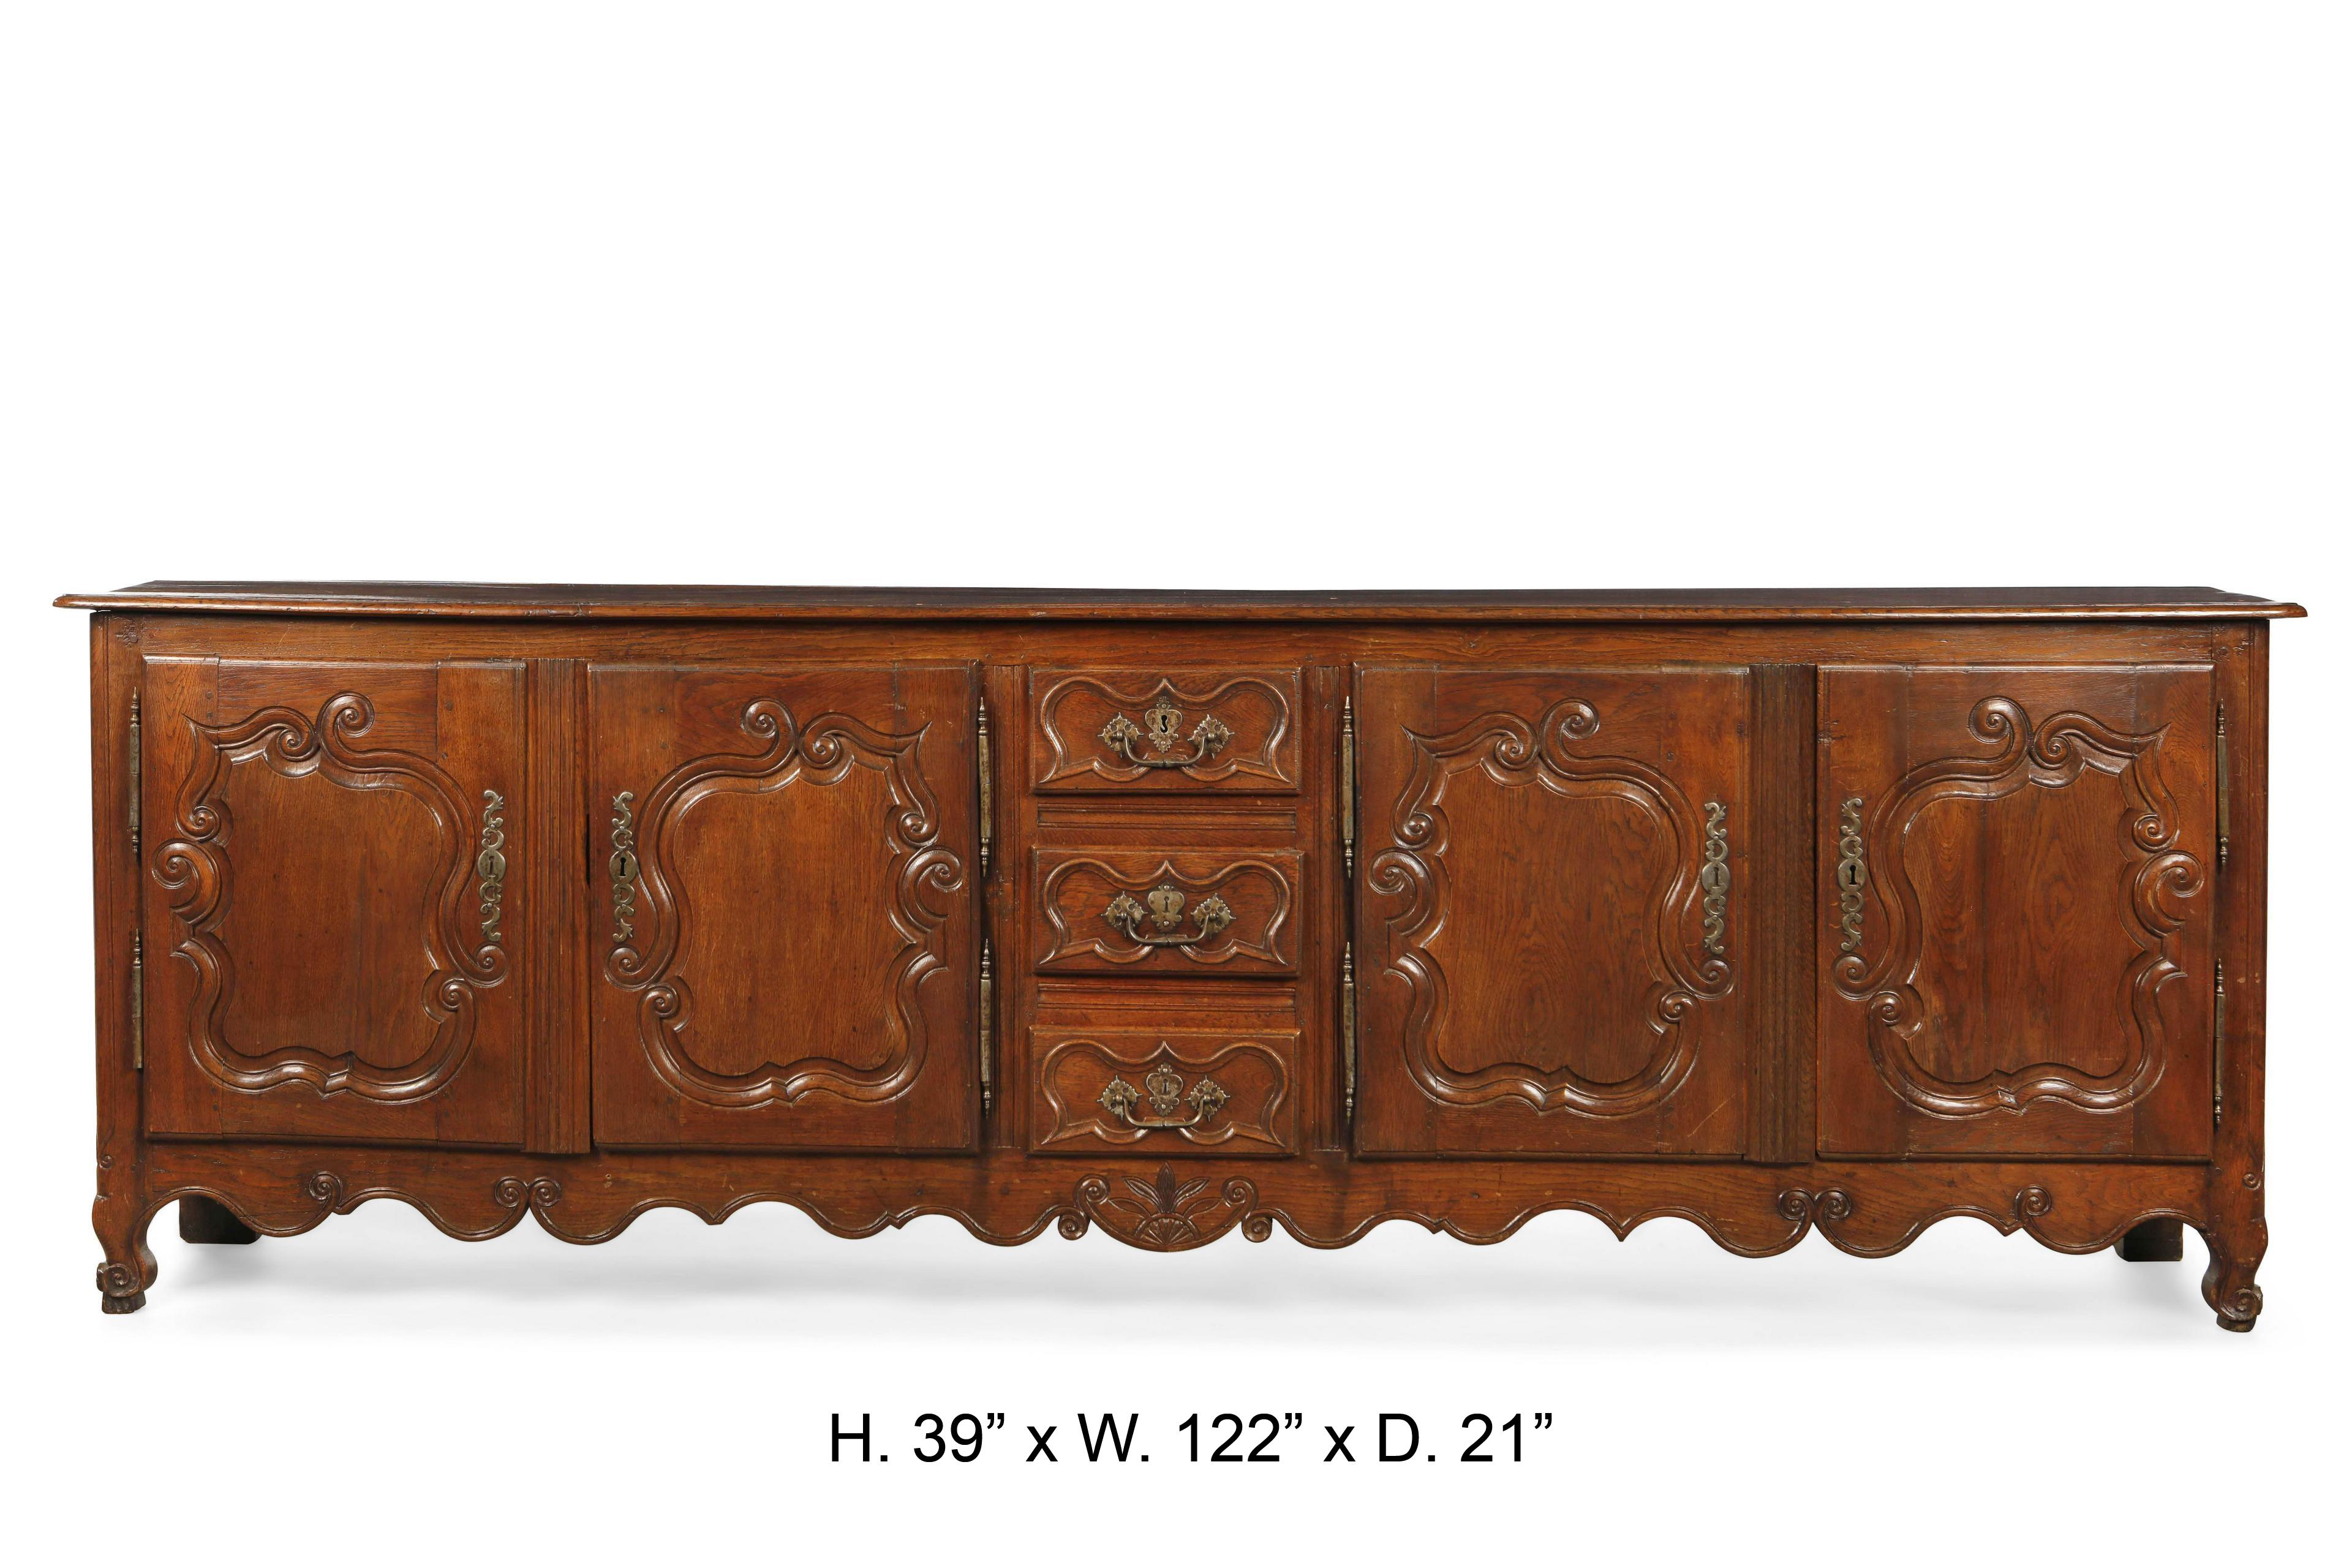 18th century French Louis XV carved oak buffet with four doors and centered by three carved drawers, all on bracket feet. With original locks.
This size buffet is very rare to find, especially in the 18th century.